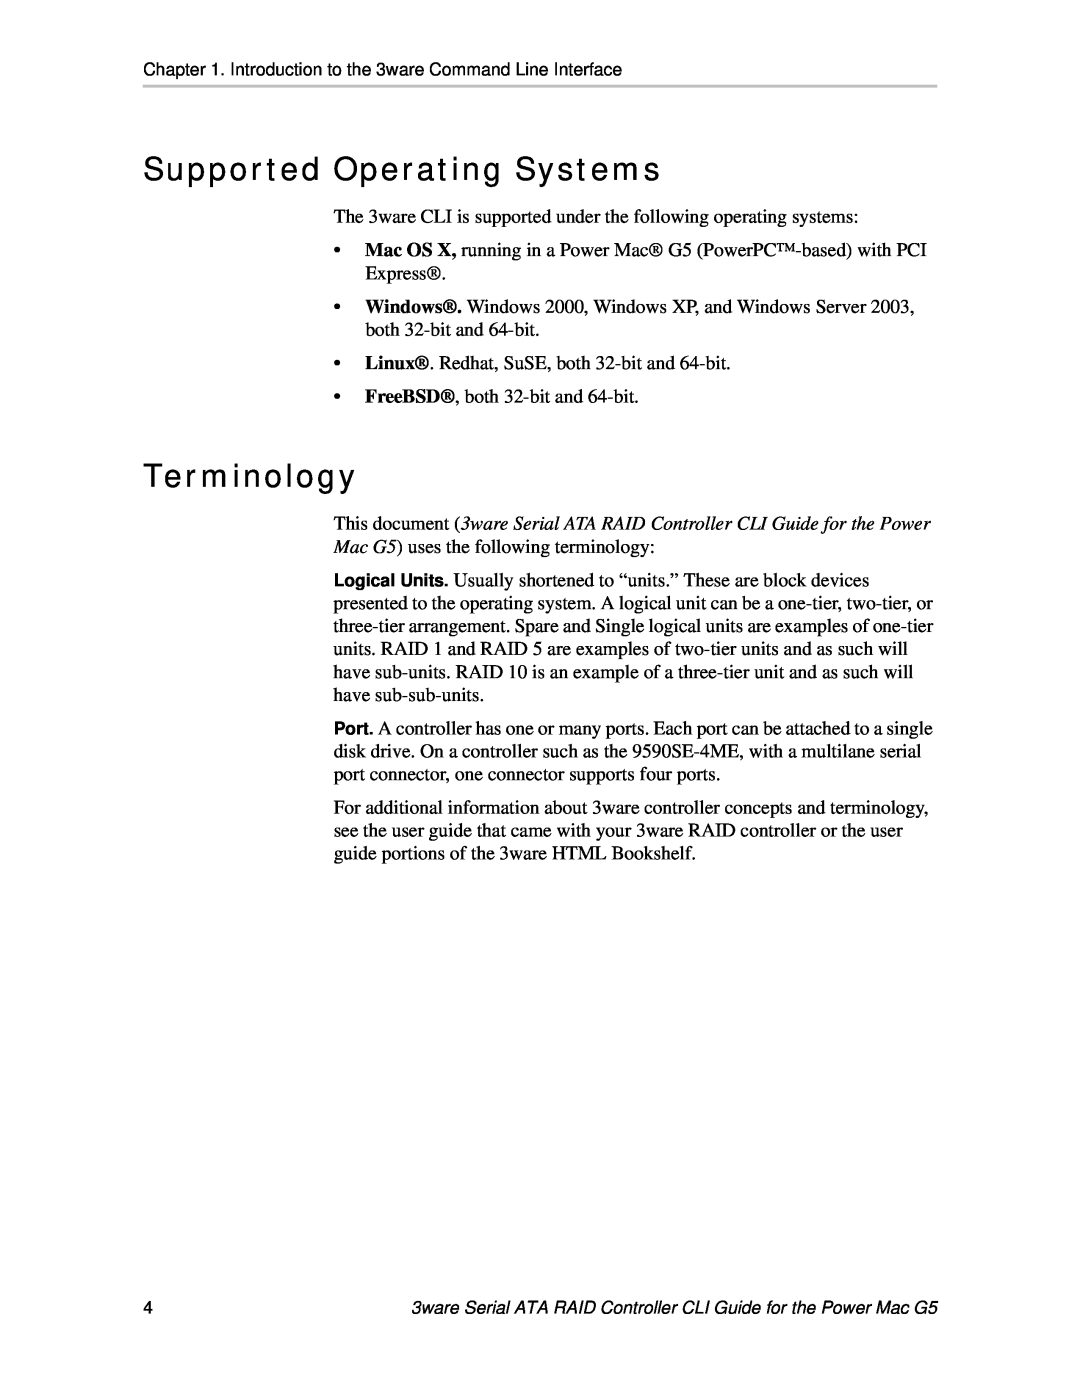 AMCC 9590SE-4ME manual Supported Operating Systems, Terminology 